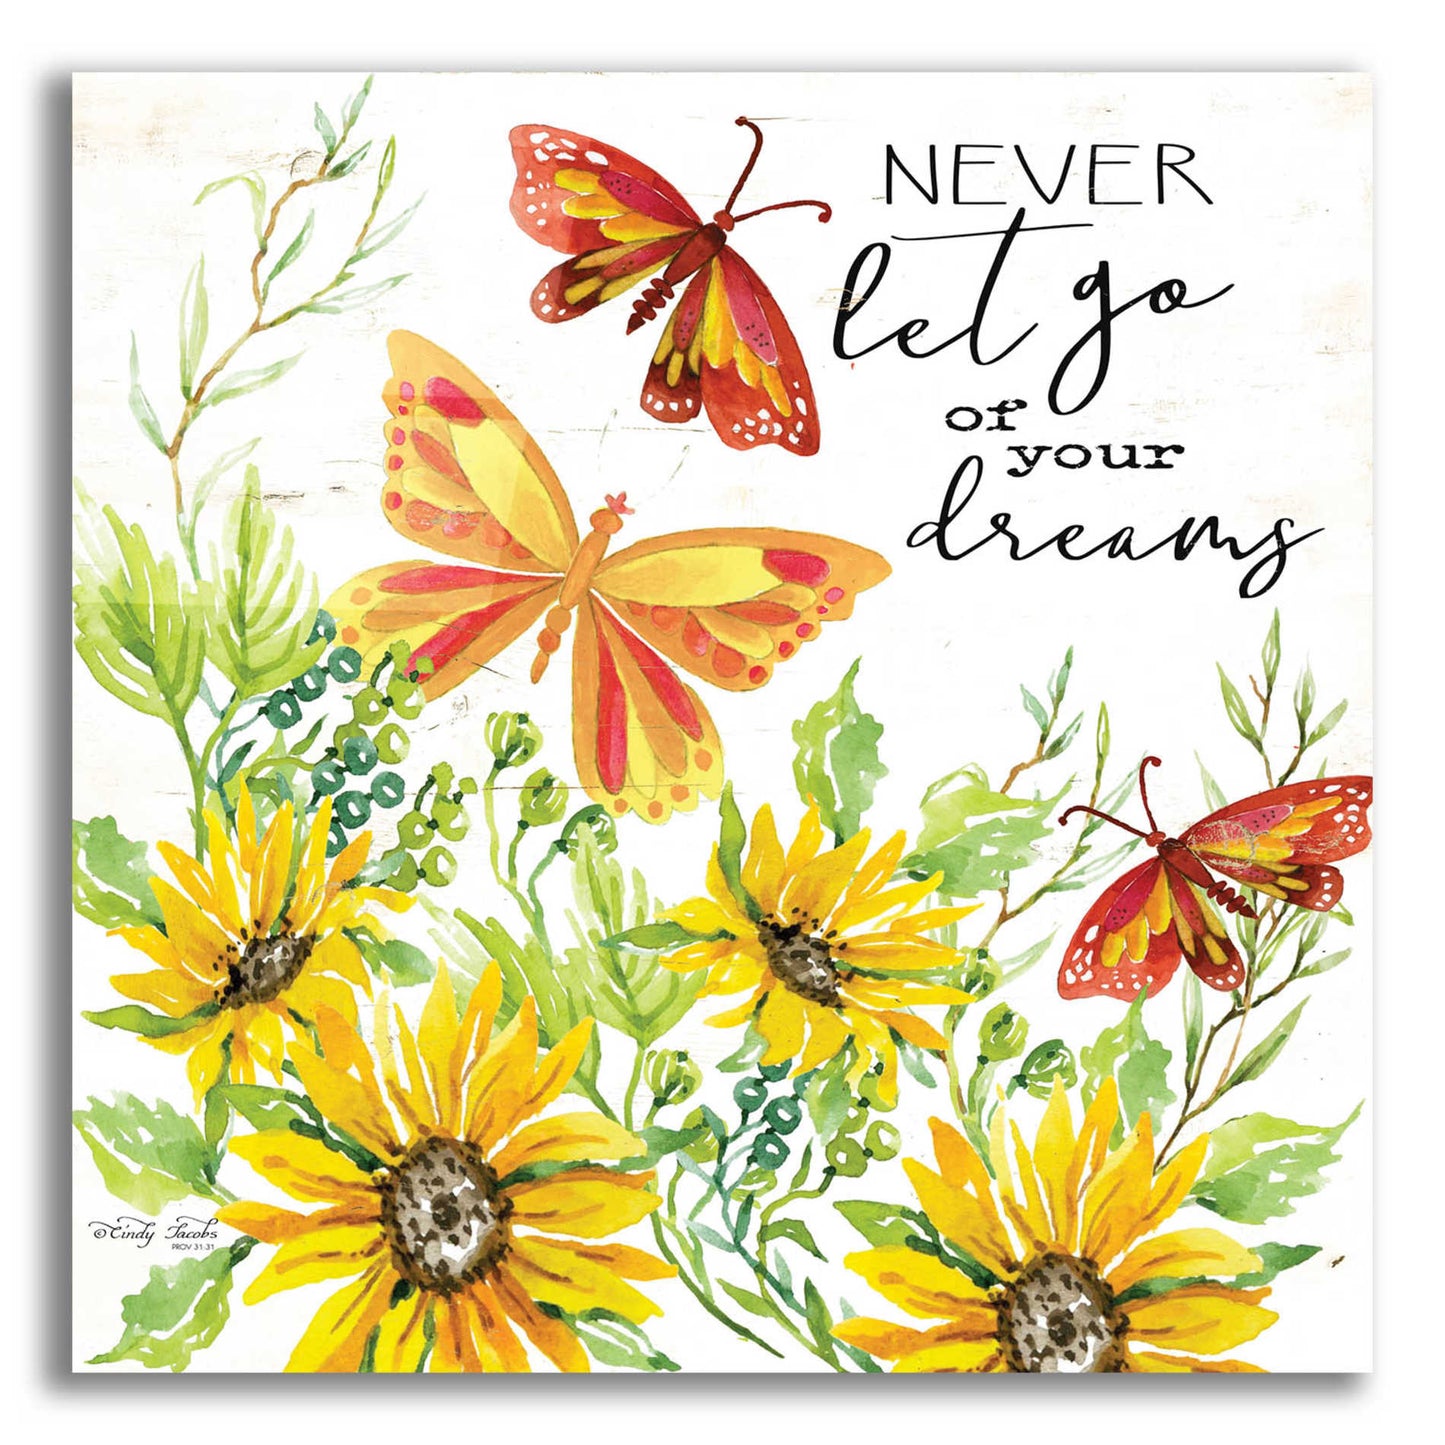 Epic Art 'Never Let Go of your Dreams' by Cindy Jacobs, Acrylic Glass Wall Art,12x12